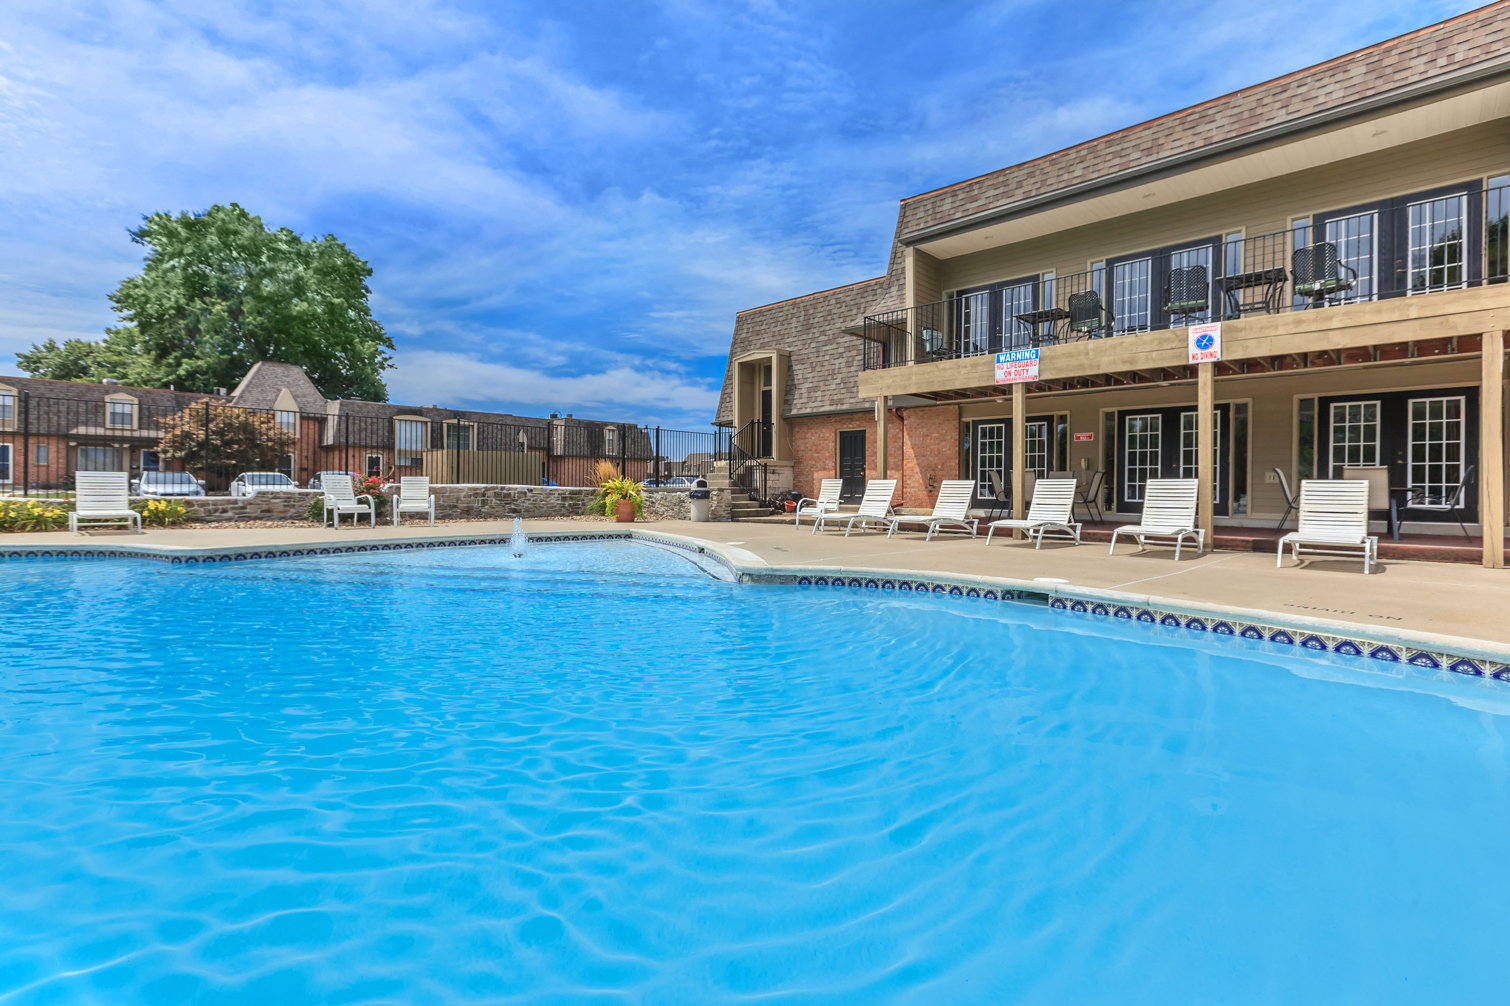 Pool View at Louisburg Square Apartments & Townhomes, Overland Park, Kansas